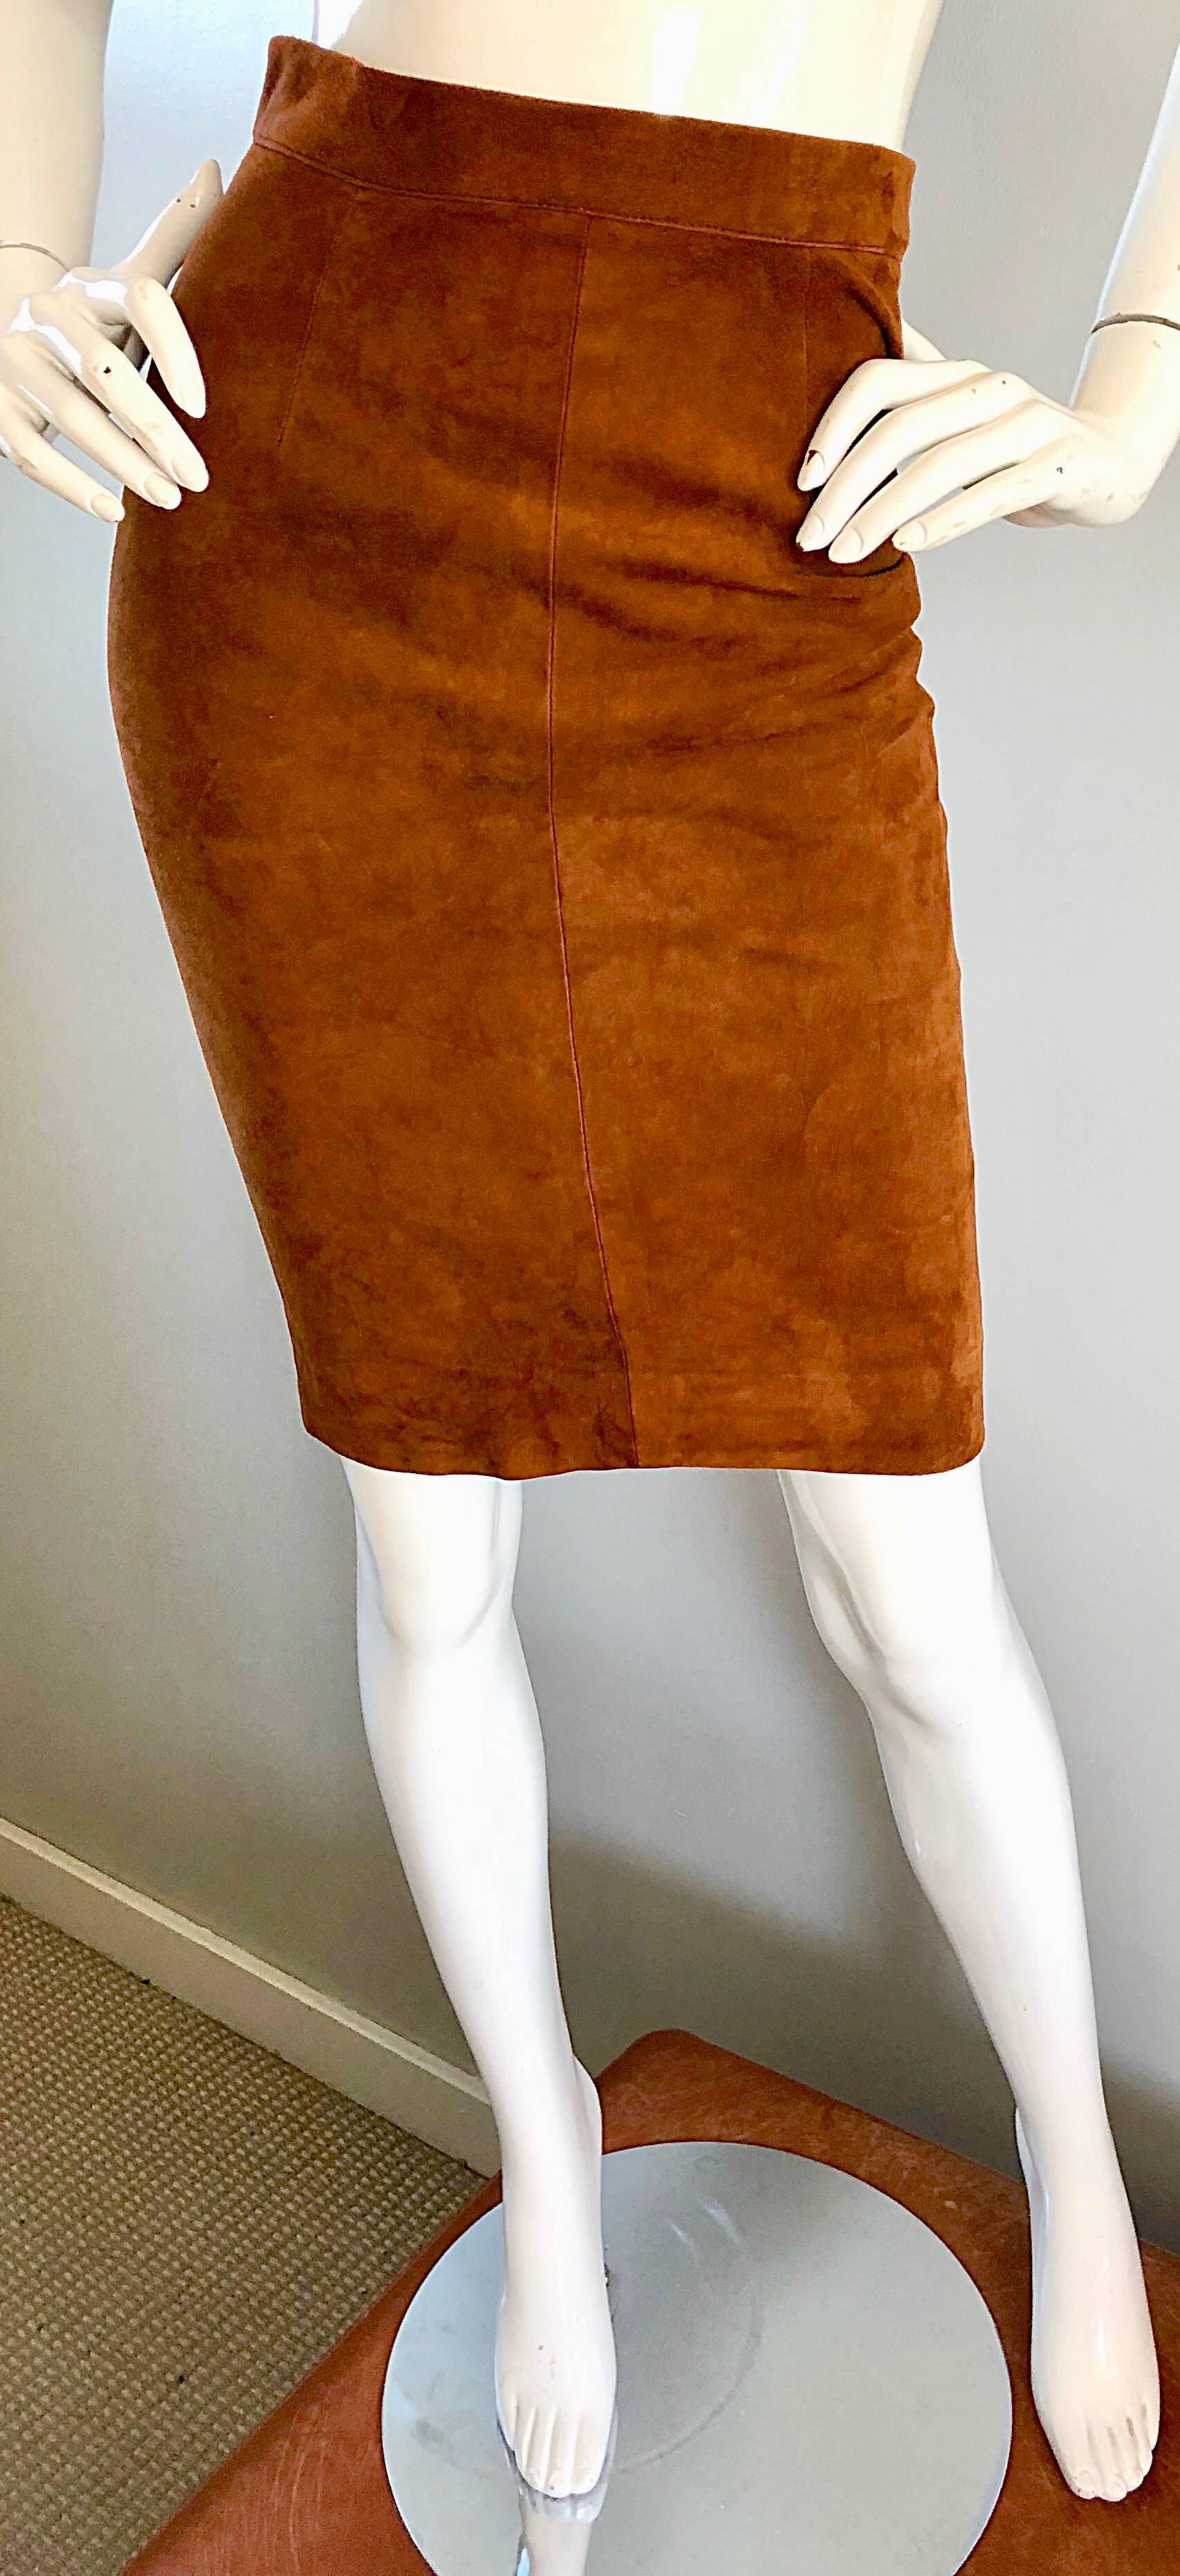 Women's 1990s Ralph Lauren Purple Label Size 4 Suede Leather High Waisted Pencil Skirt